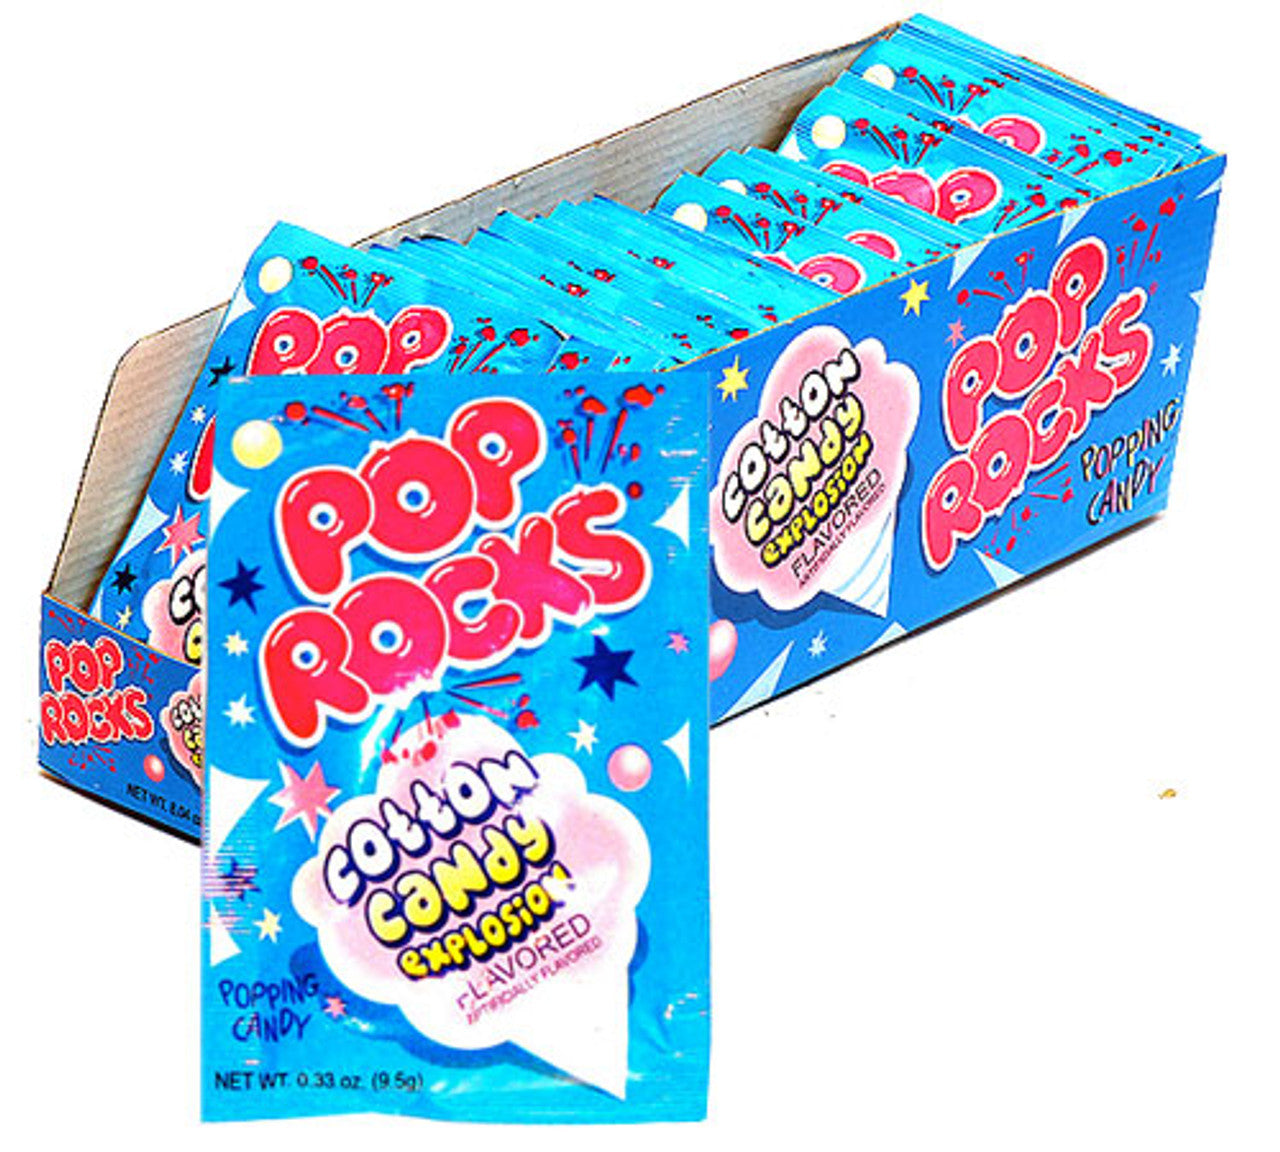 Pop Rocks Cherry Popping Candy - 0.33-oz. Package